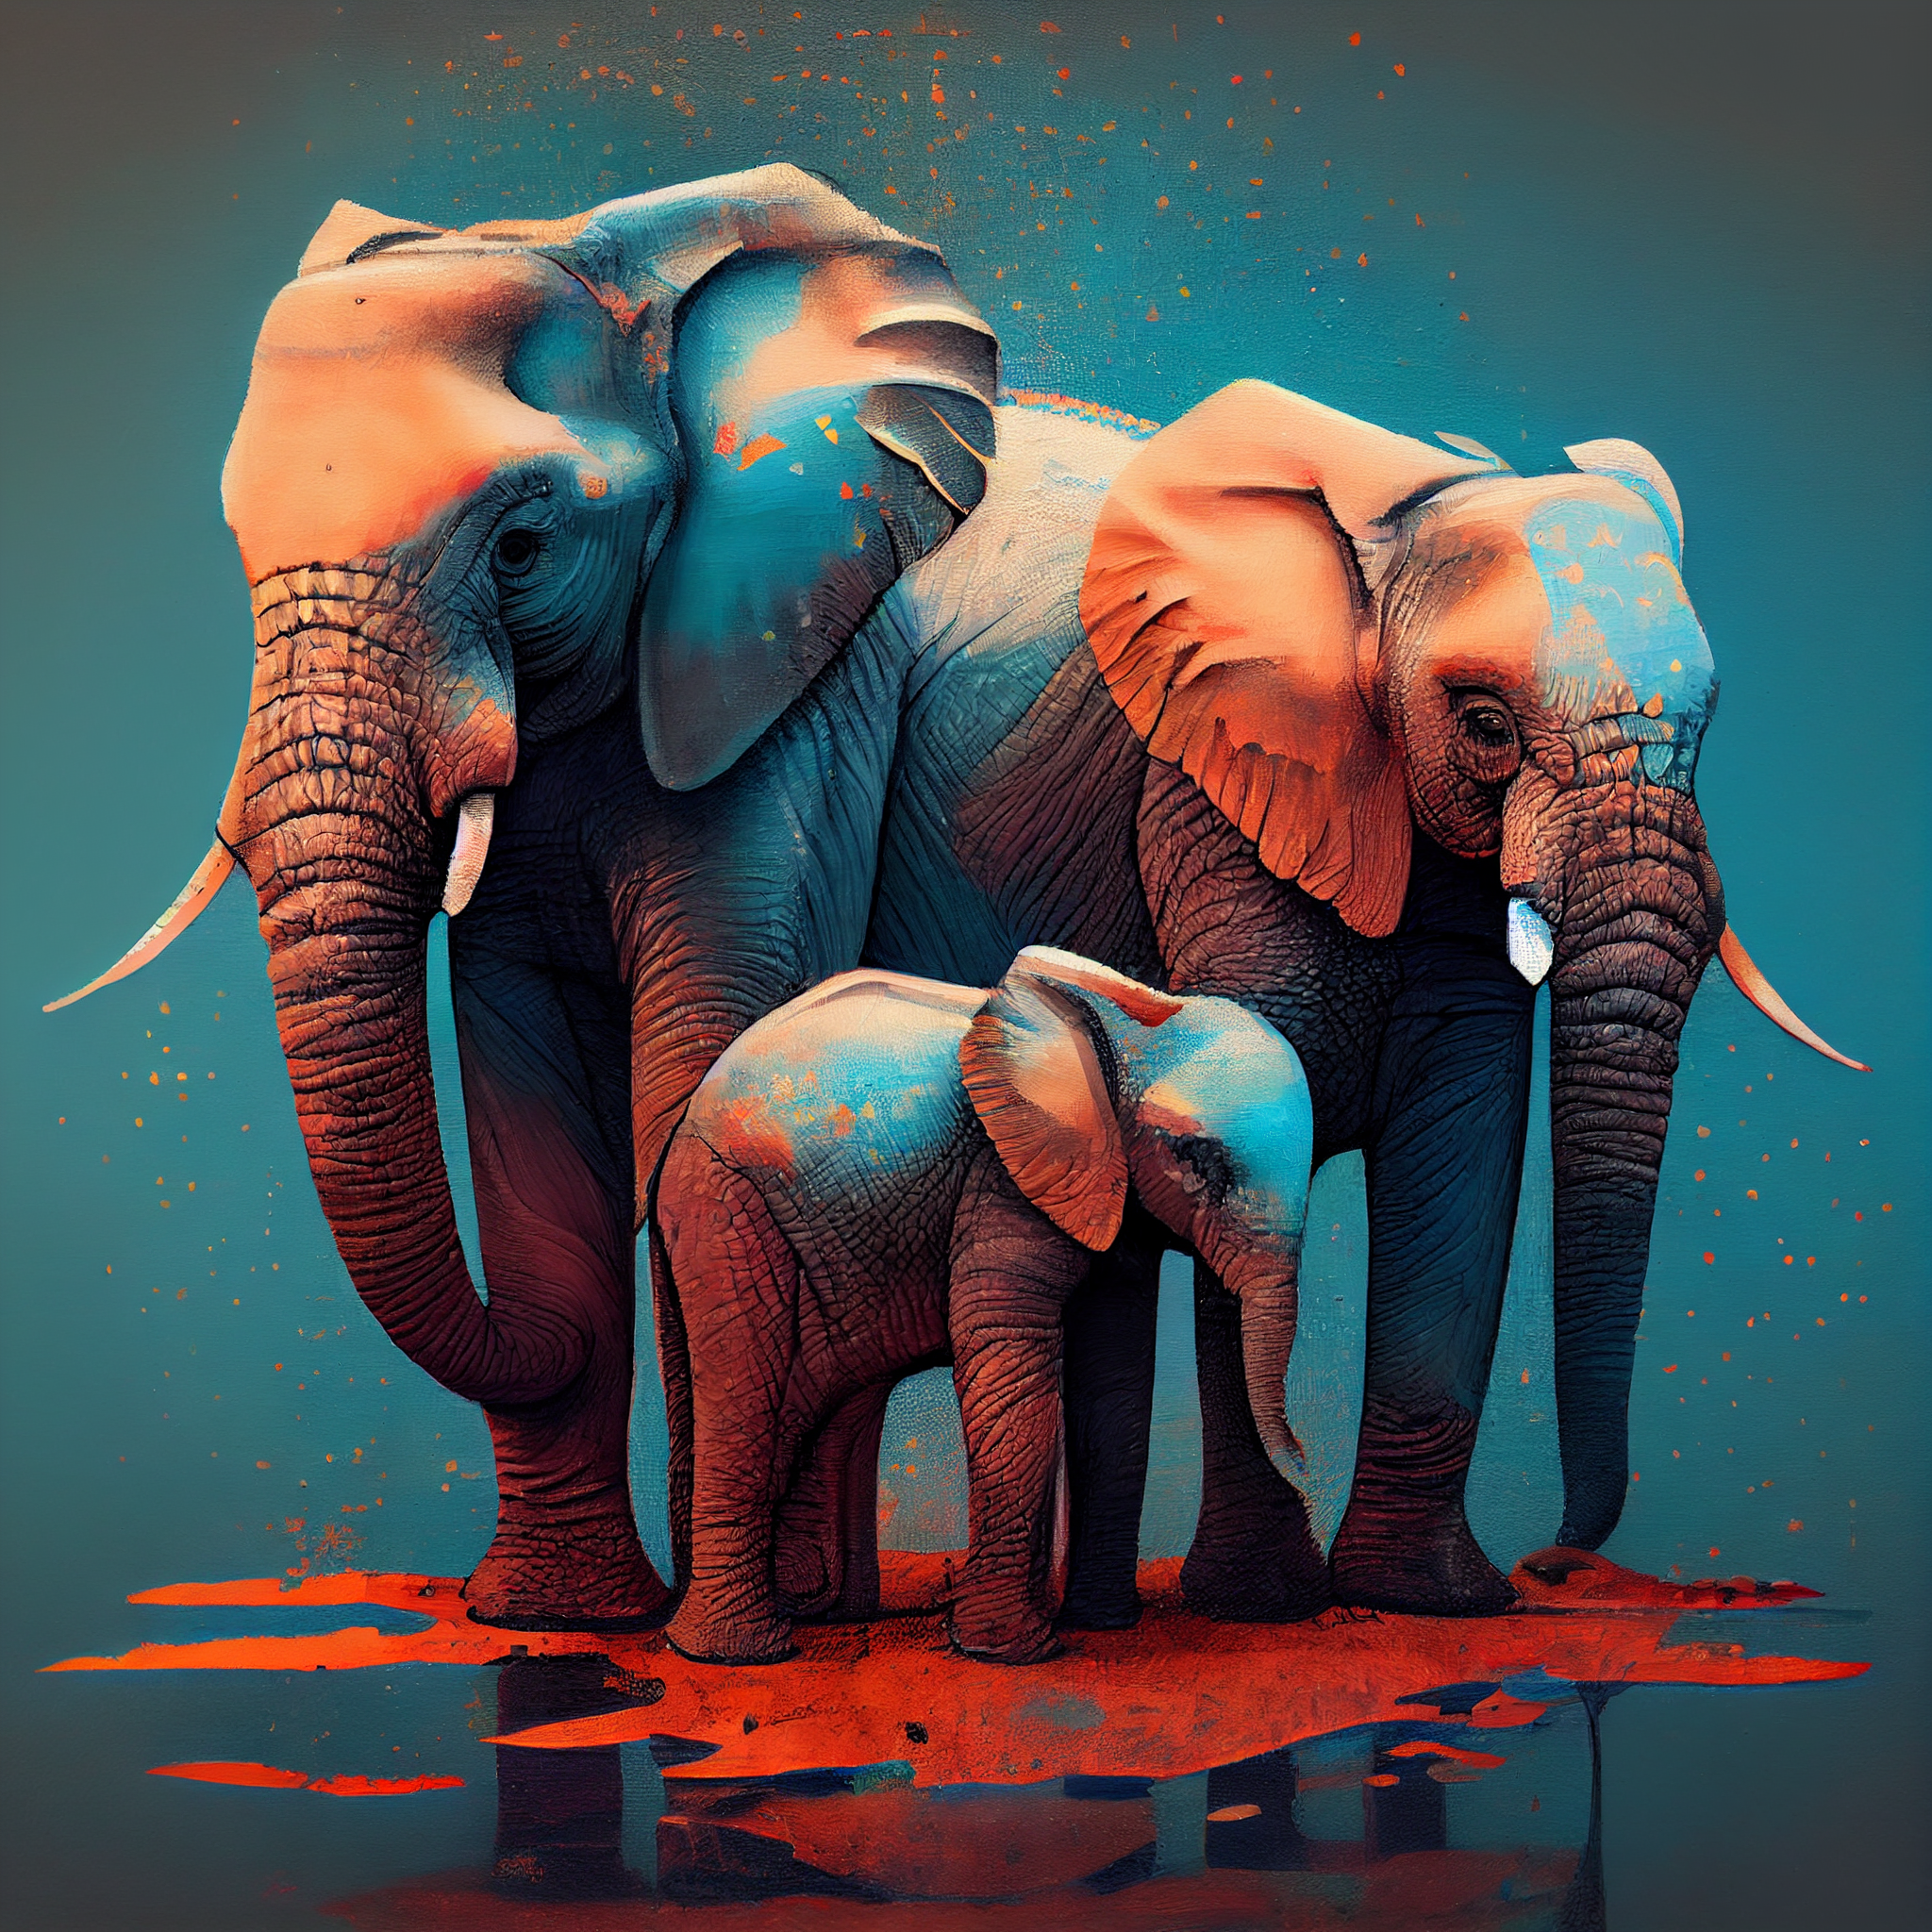 Add a Touch of Refinement to Your Home with Our Colorful Elephant Art Print